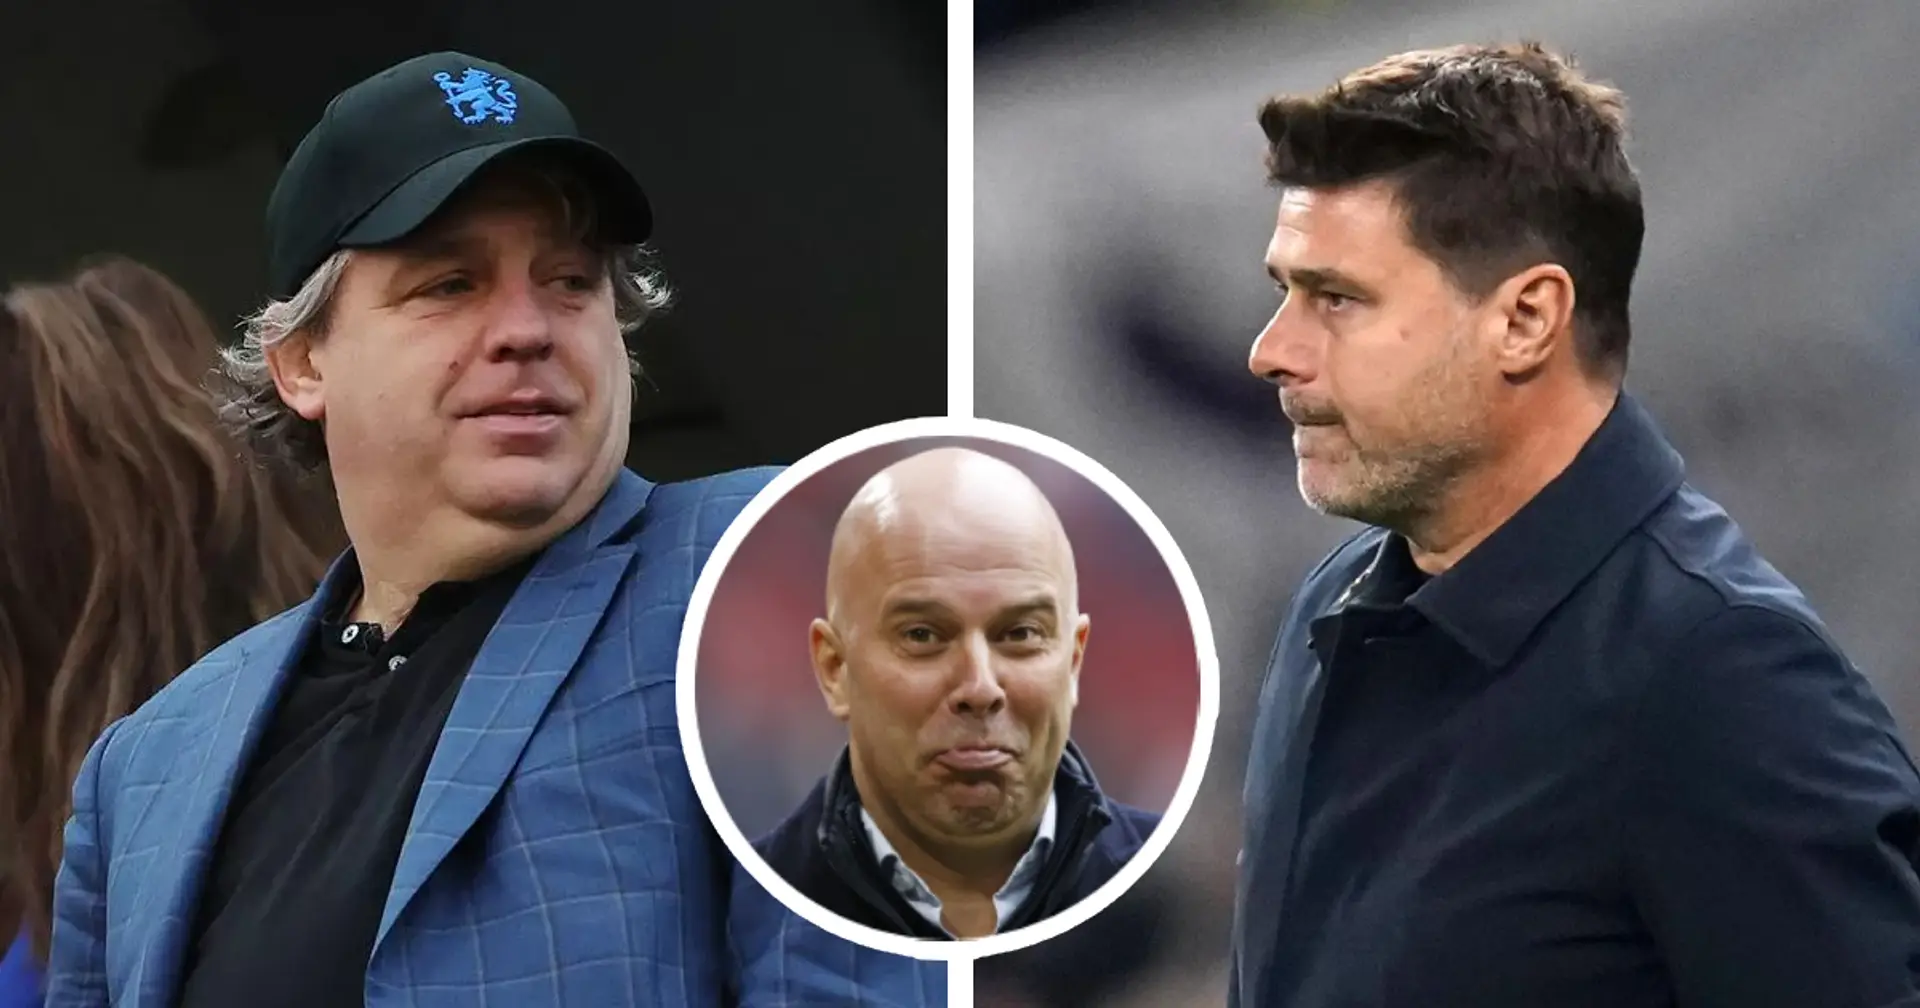 Chelsea aimed to hire another manager before Pochettino, Boehly flew him in private jet for talks (reliability: 4 stars)